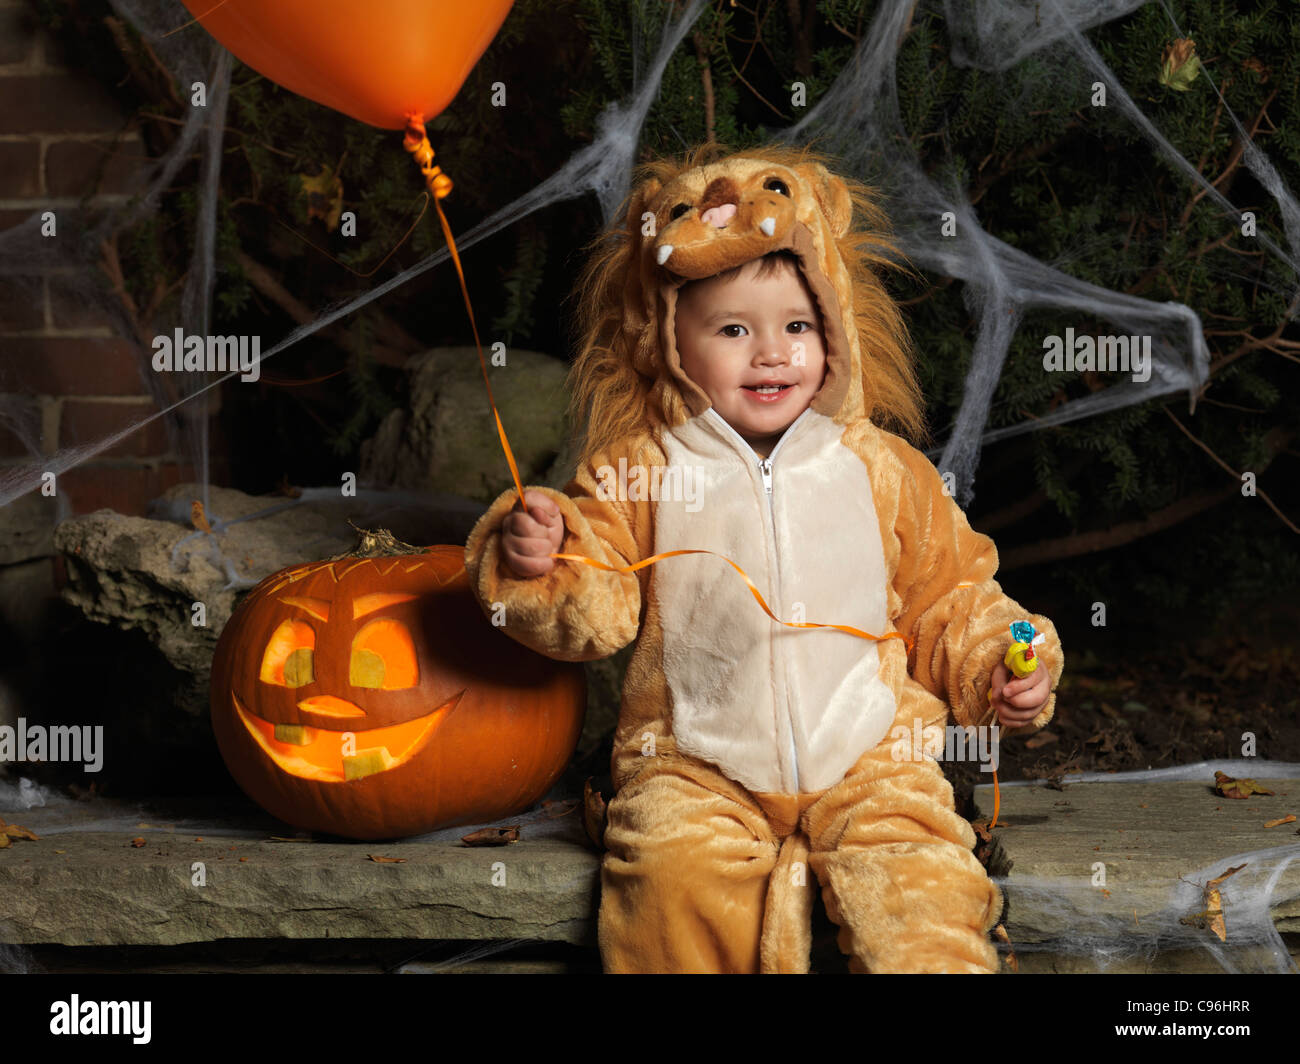 License available at MaximImages.com - Baby boy in a Halloween costume with a balloon and candy sitting beside a carved pumpkin Stock Photo